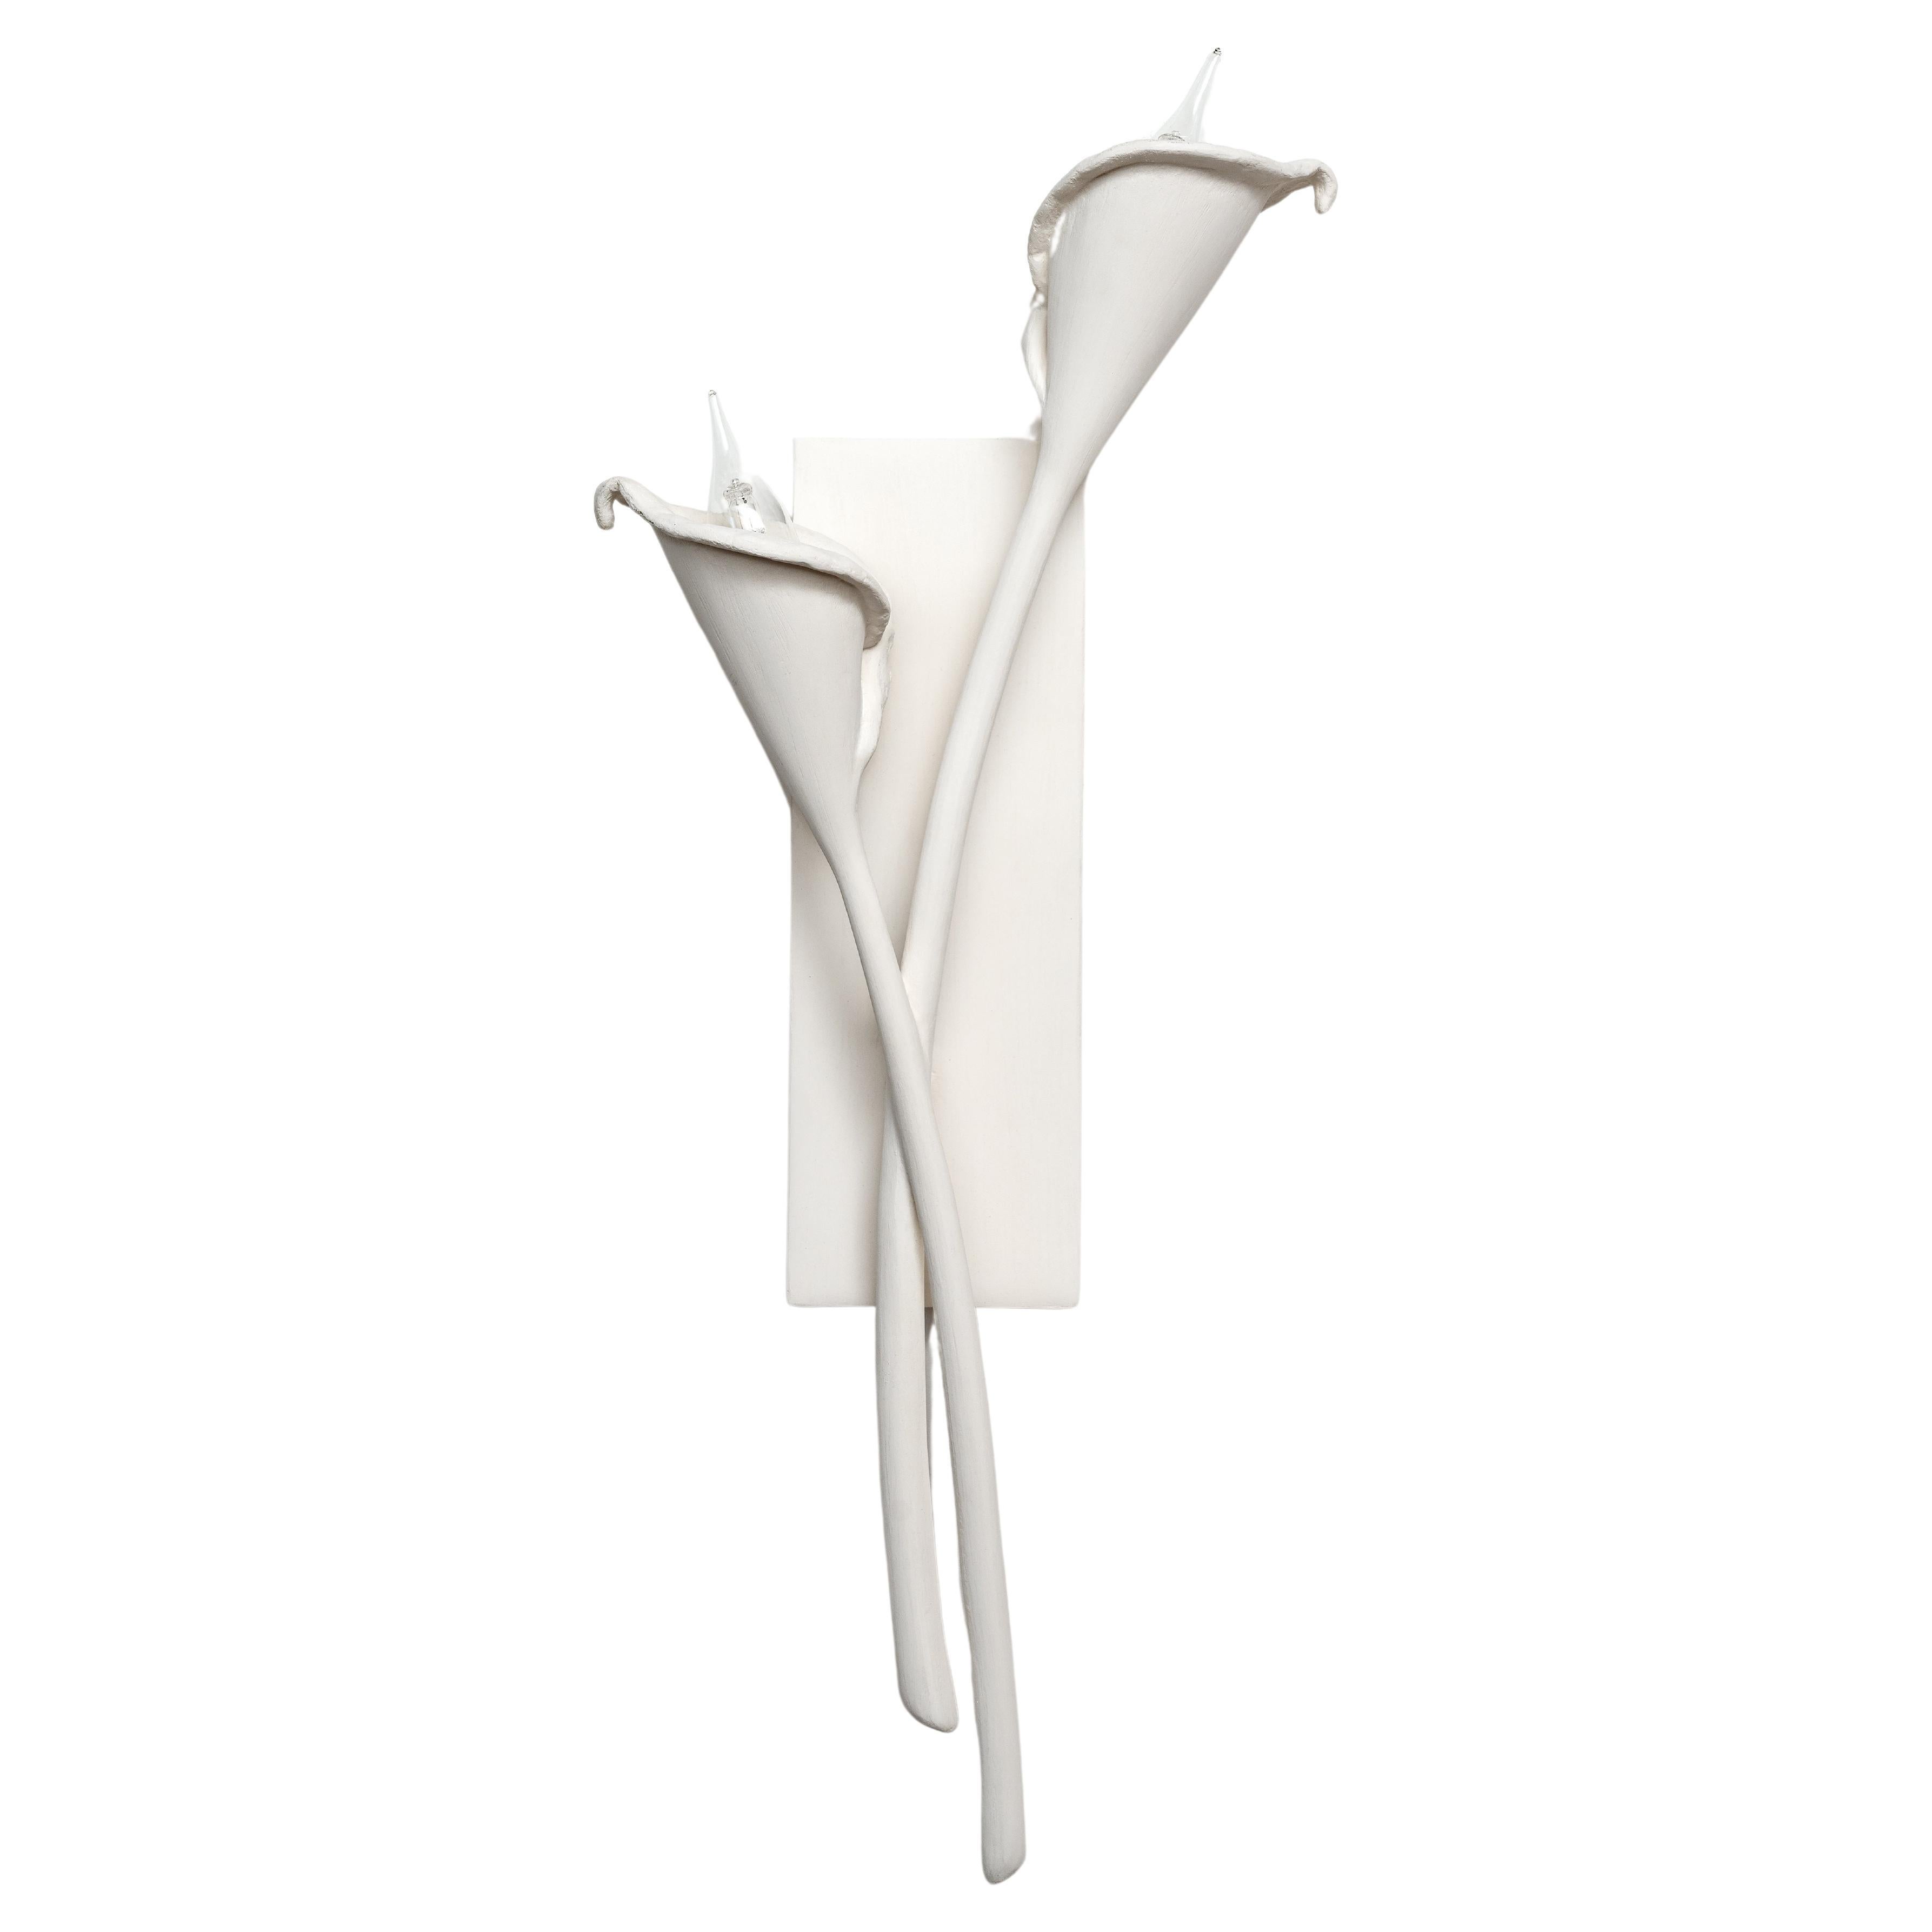 Calla Lily Contemporary Wall Sconce, Wall Light in White Plaster, Pair, Benediko For Sale